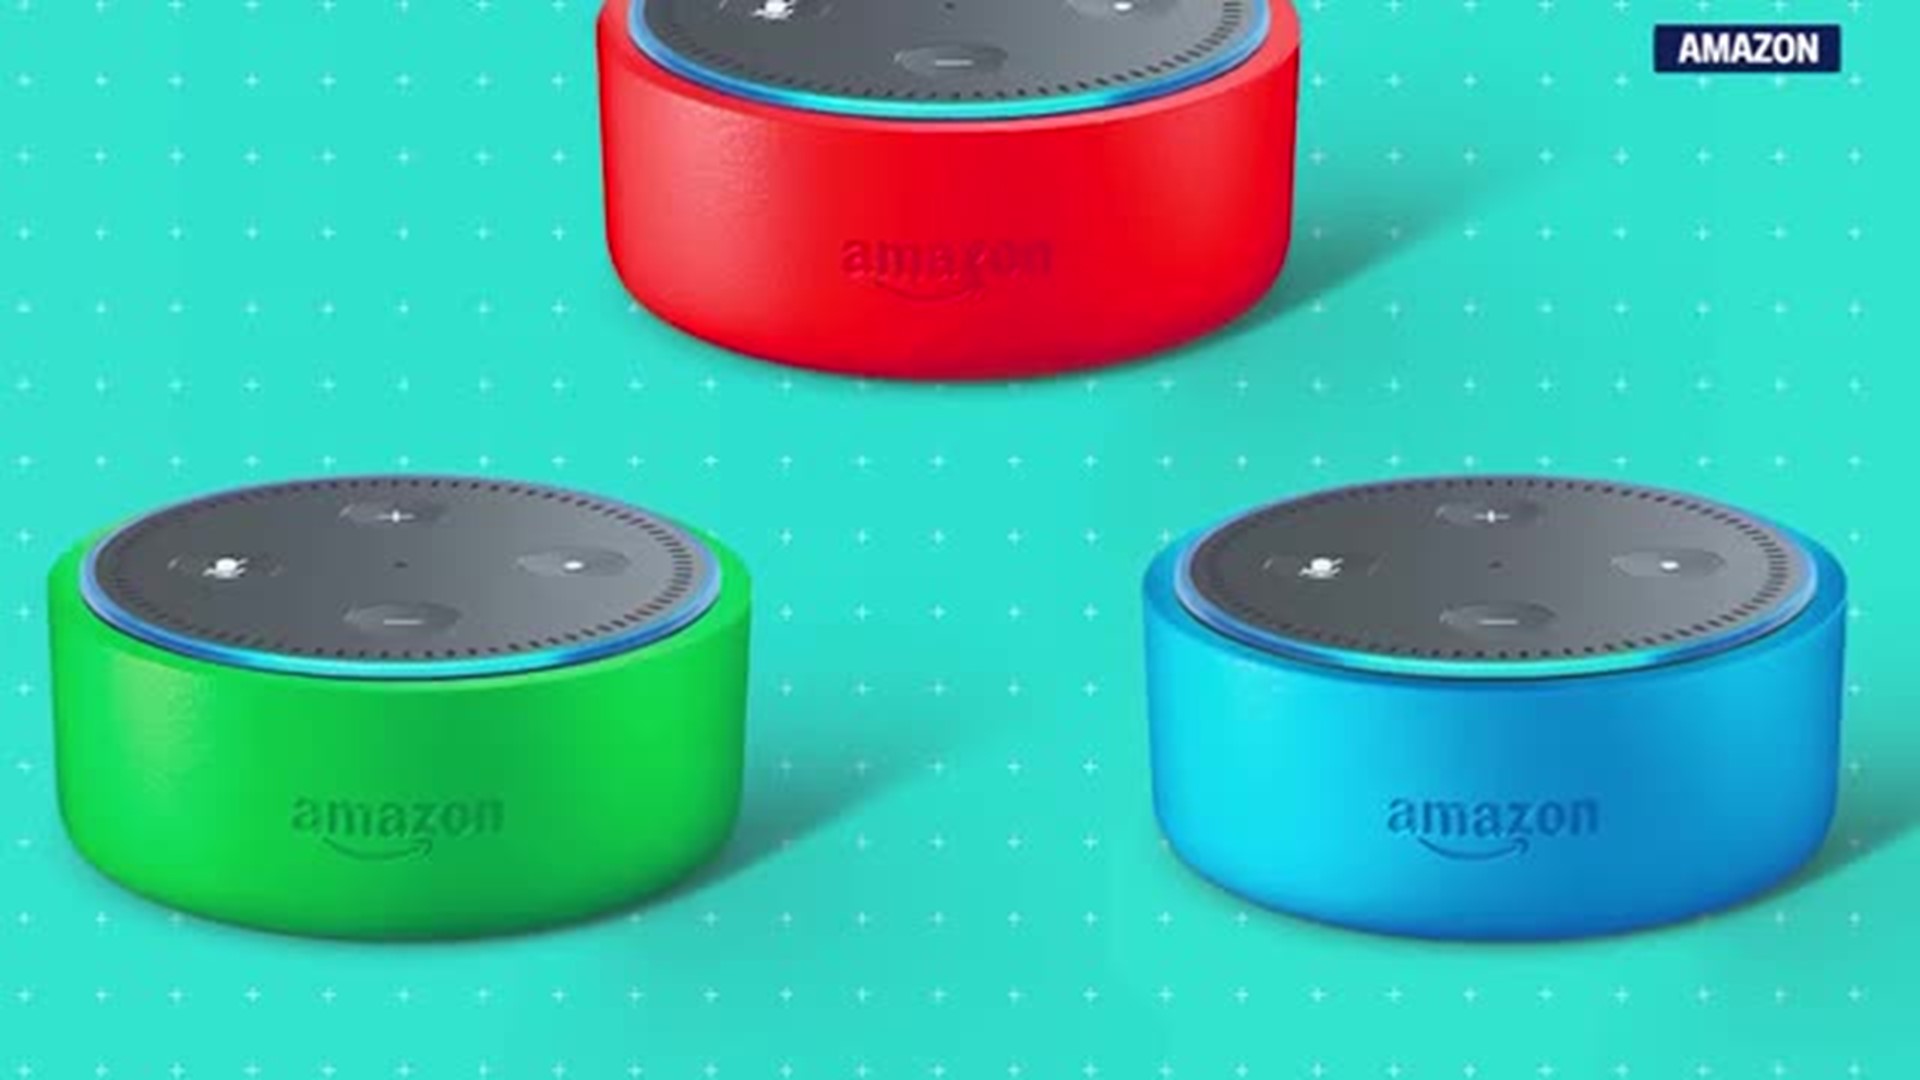 Prime Day Is Here and Amazon Isn't the Only Retailer Offering Deals